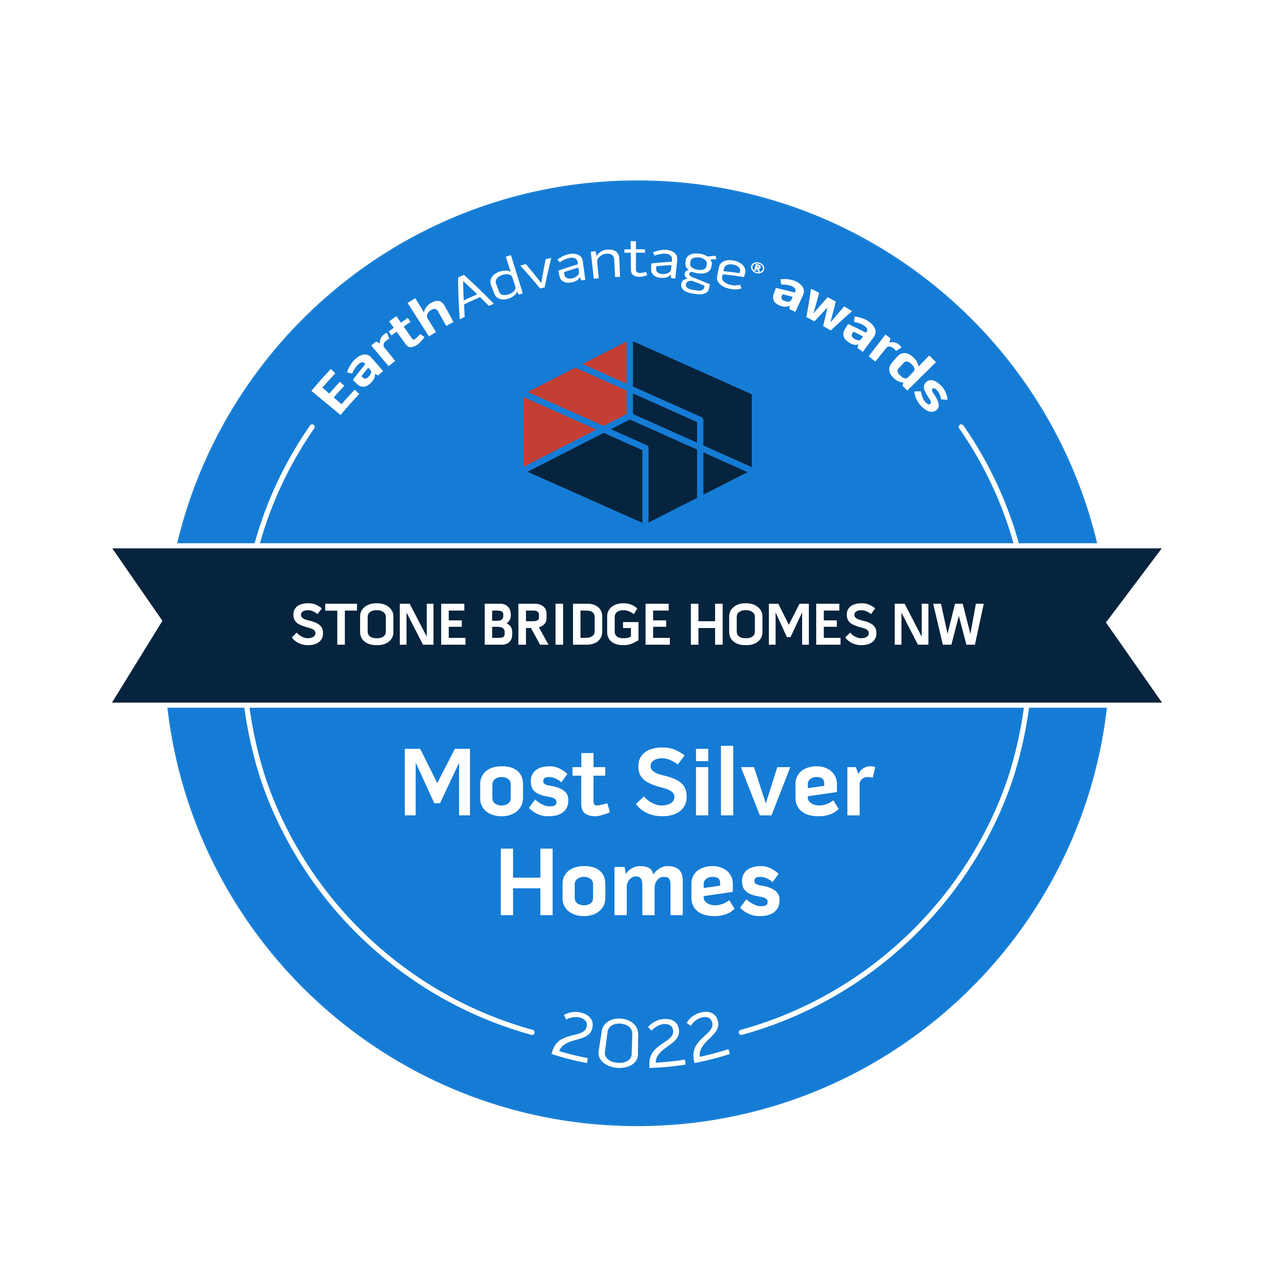 Most Silver Homes